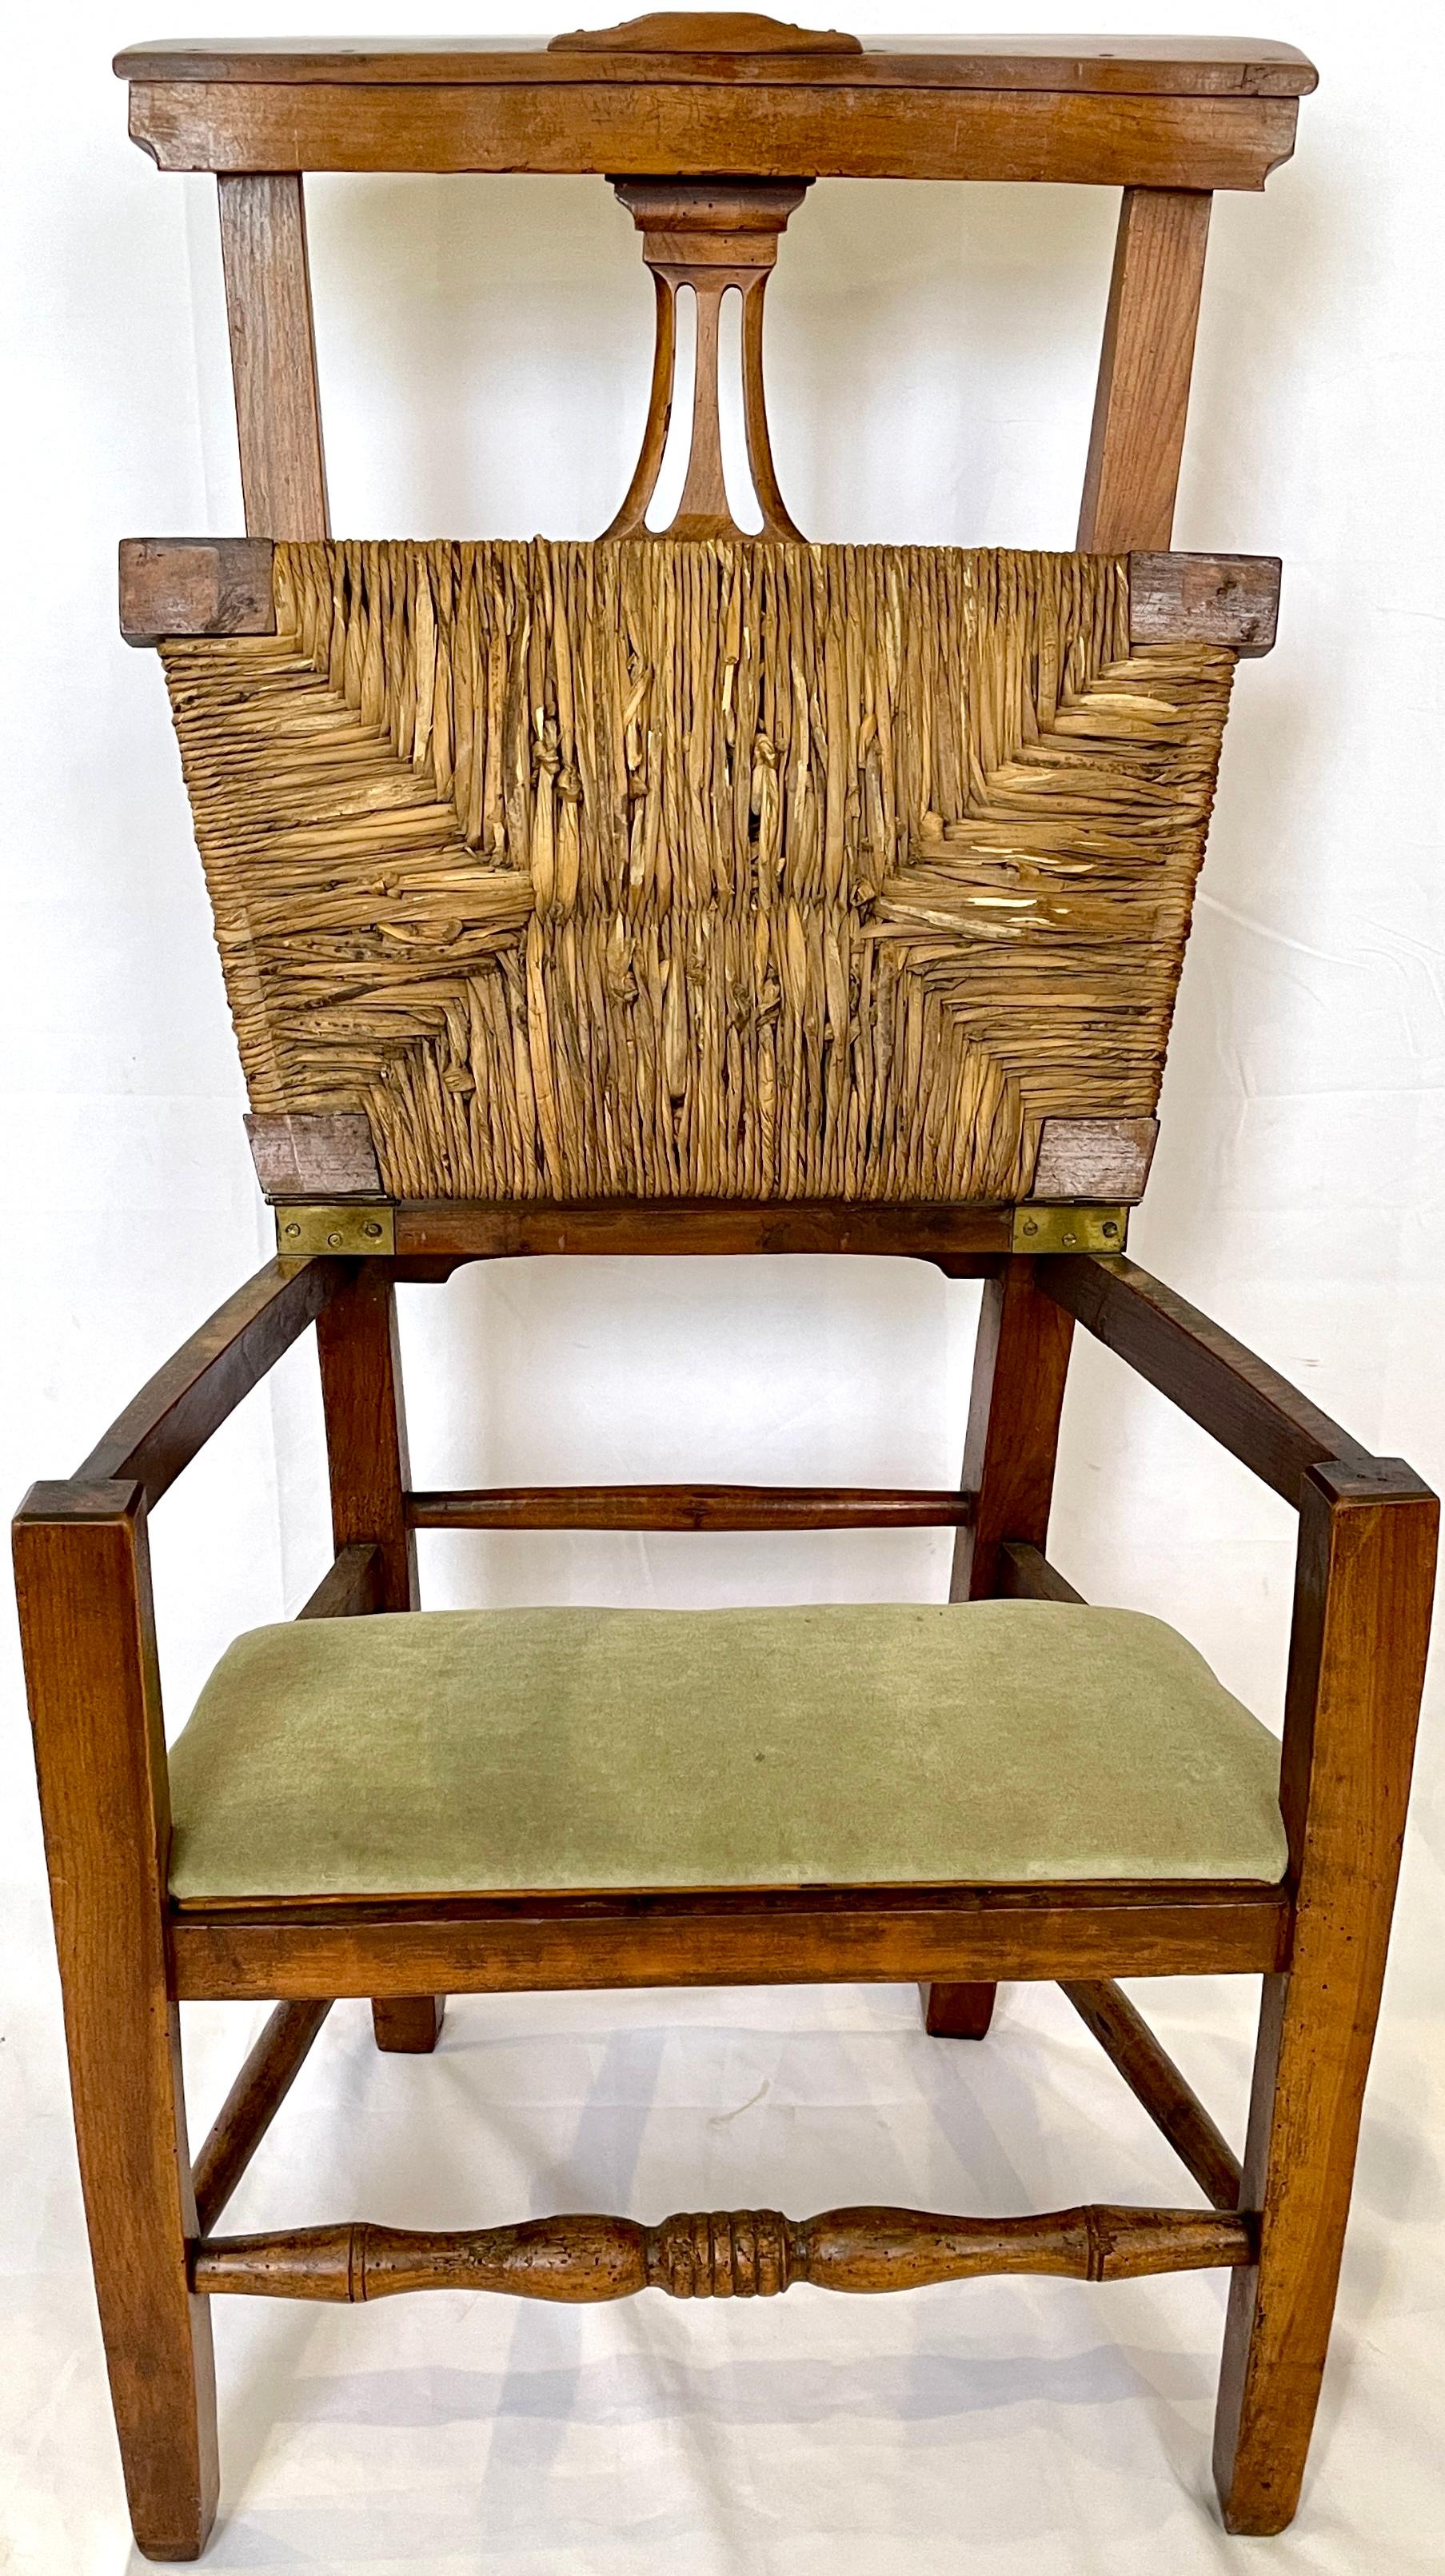 Wood Antique 18th Century French Provincial Prie Dieu Chair For Sale